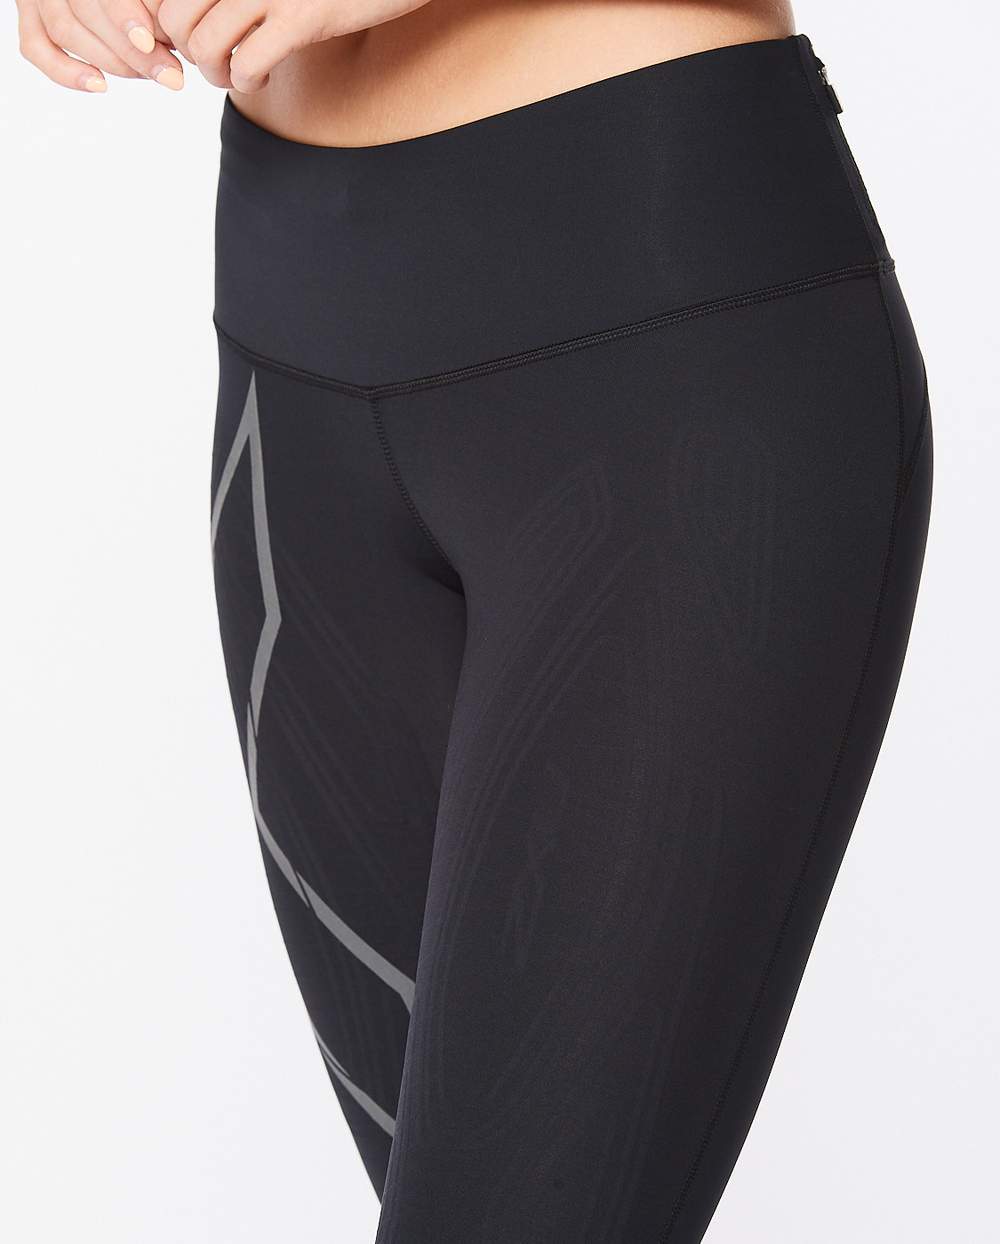 Calzas Compresión Mujer Light Speed Mid-Rise Compression Tights - Black/Black Reflective - 2XU